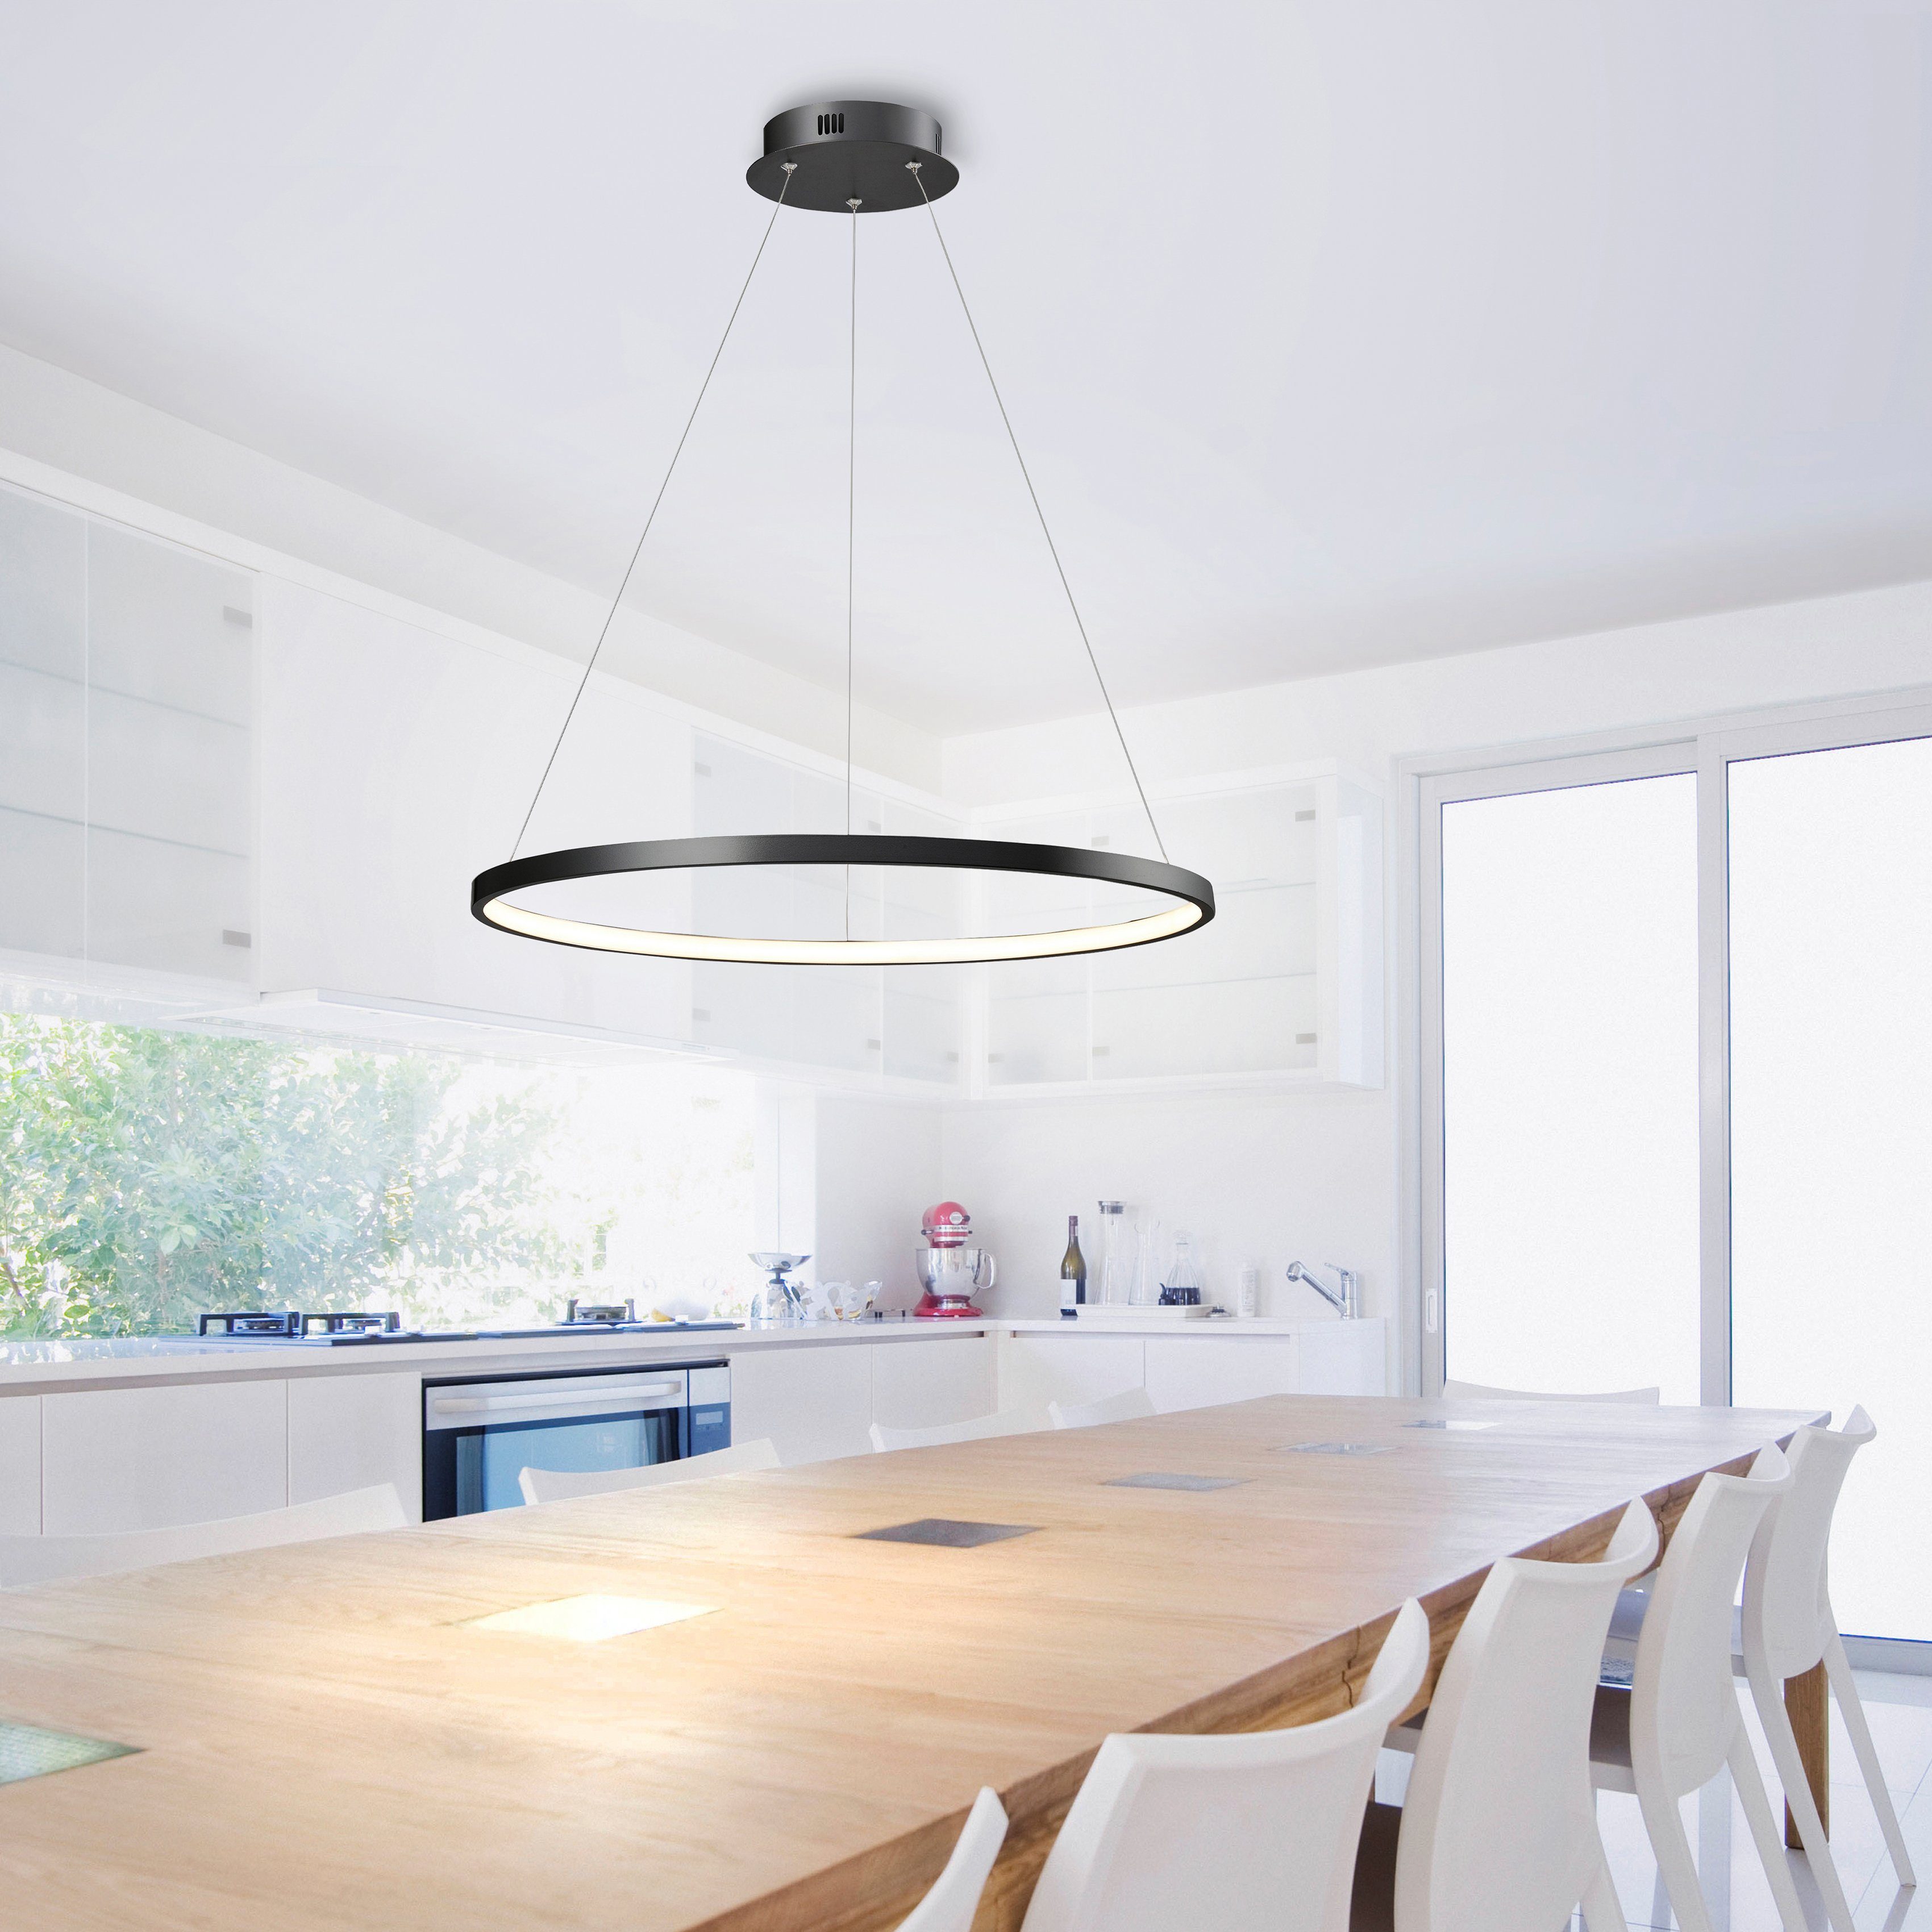 Places of Style LED Pendelleuchte Ring LED fest Warmweiß, Hängelampe modern Raylan, LED integriert